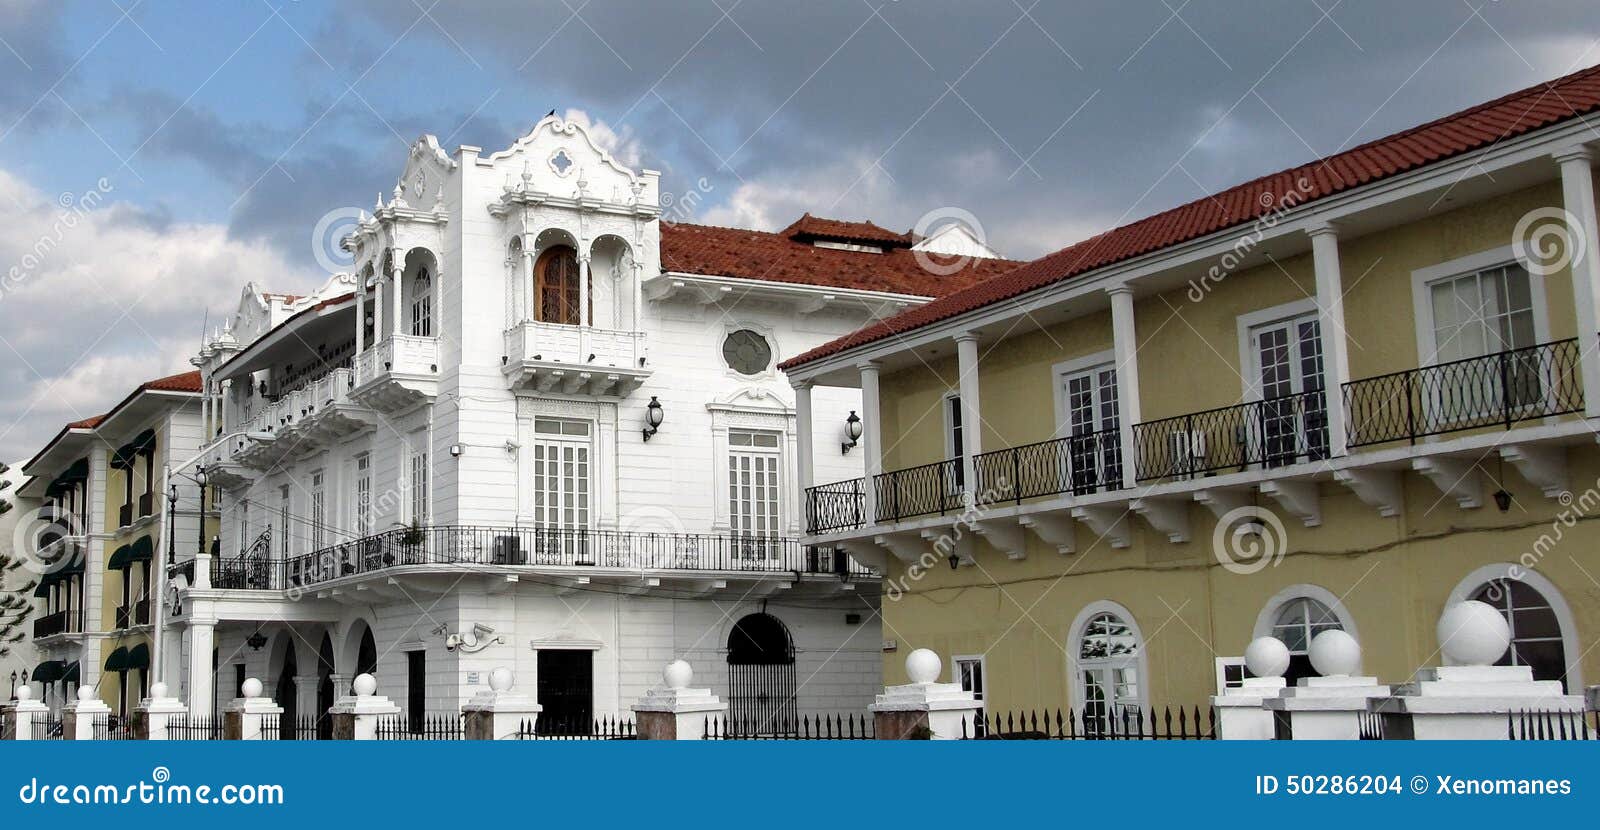 panama's presidential palace, located in casco antiguo - unesco patrimony in old panama city